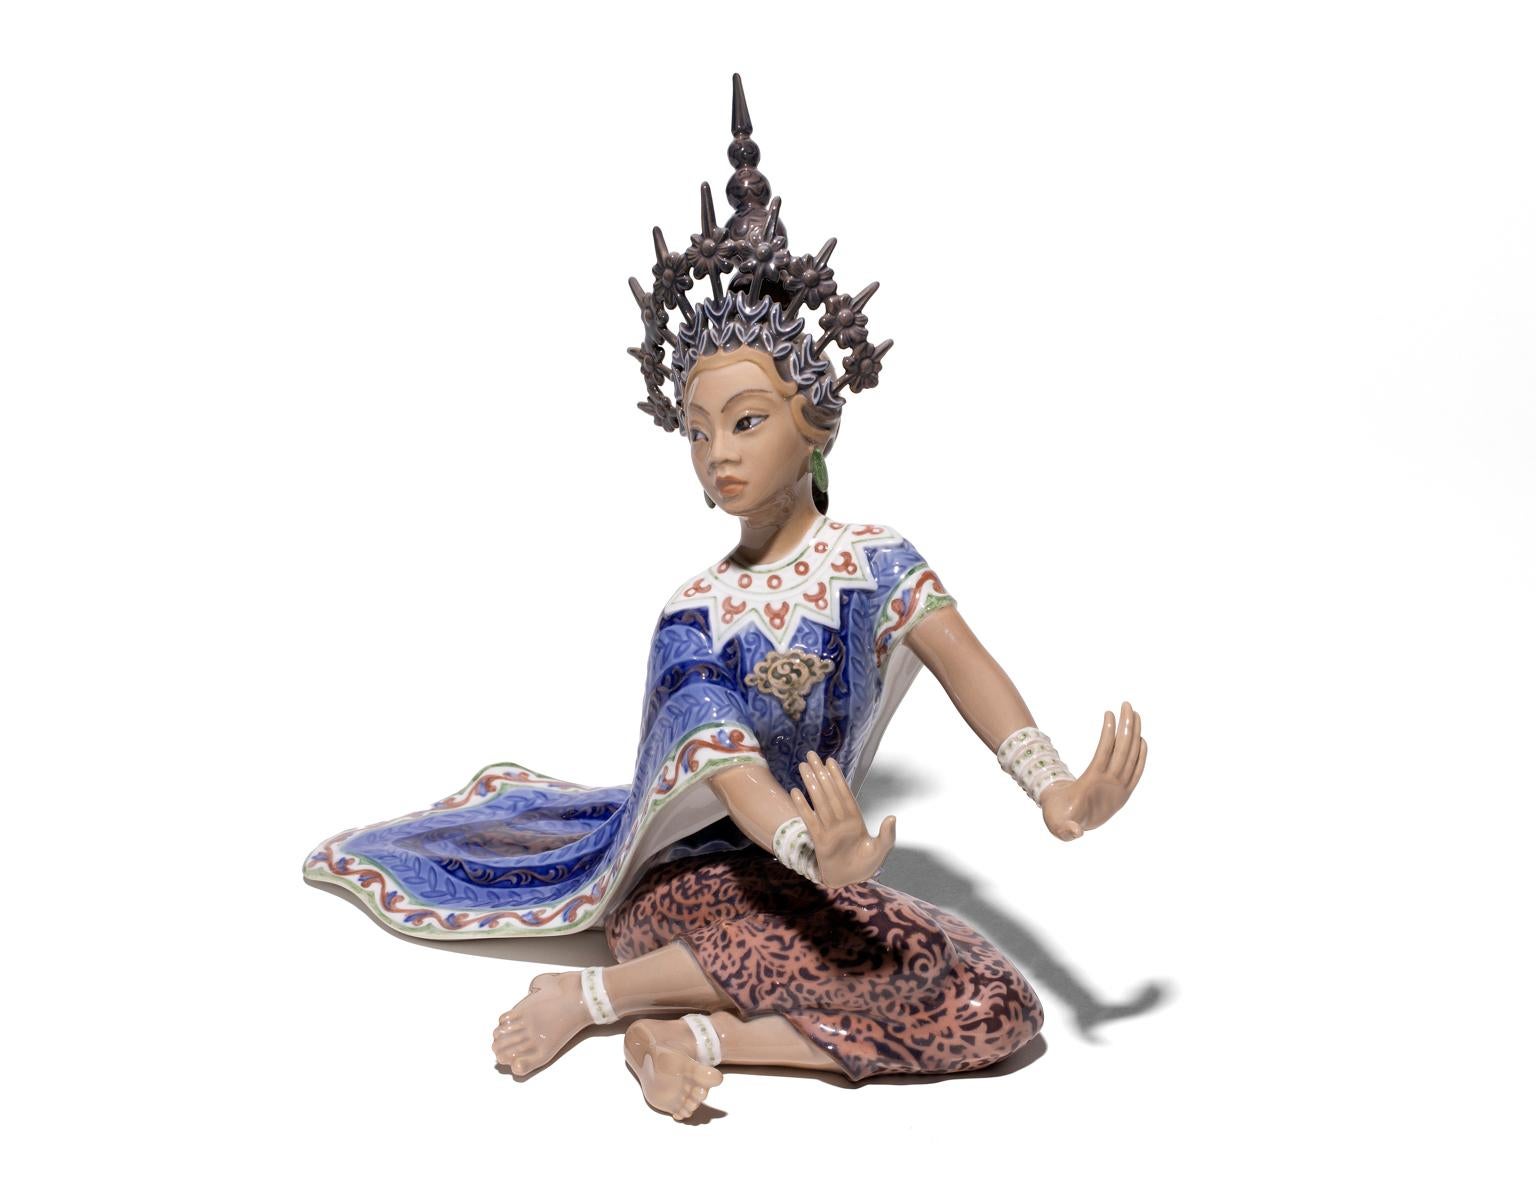 The creator of this piece is Dahl Jensen. The Siamese dancer depicted is no doubt in the Royal Court with her elaborate headdress and elegant robe of indigo blue. The figure has a lovely animation to it as though it is about to stand and continue